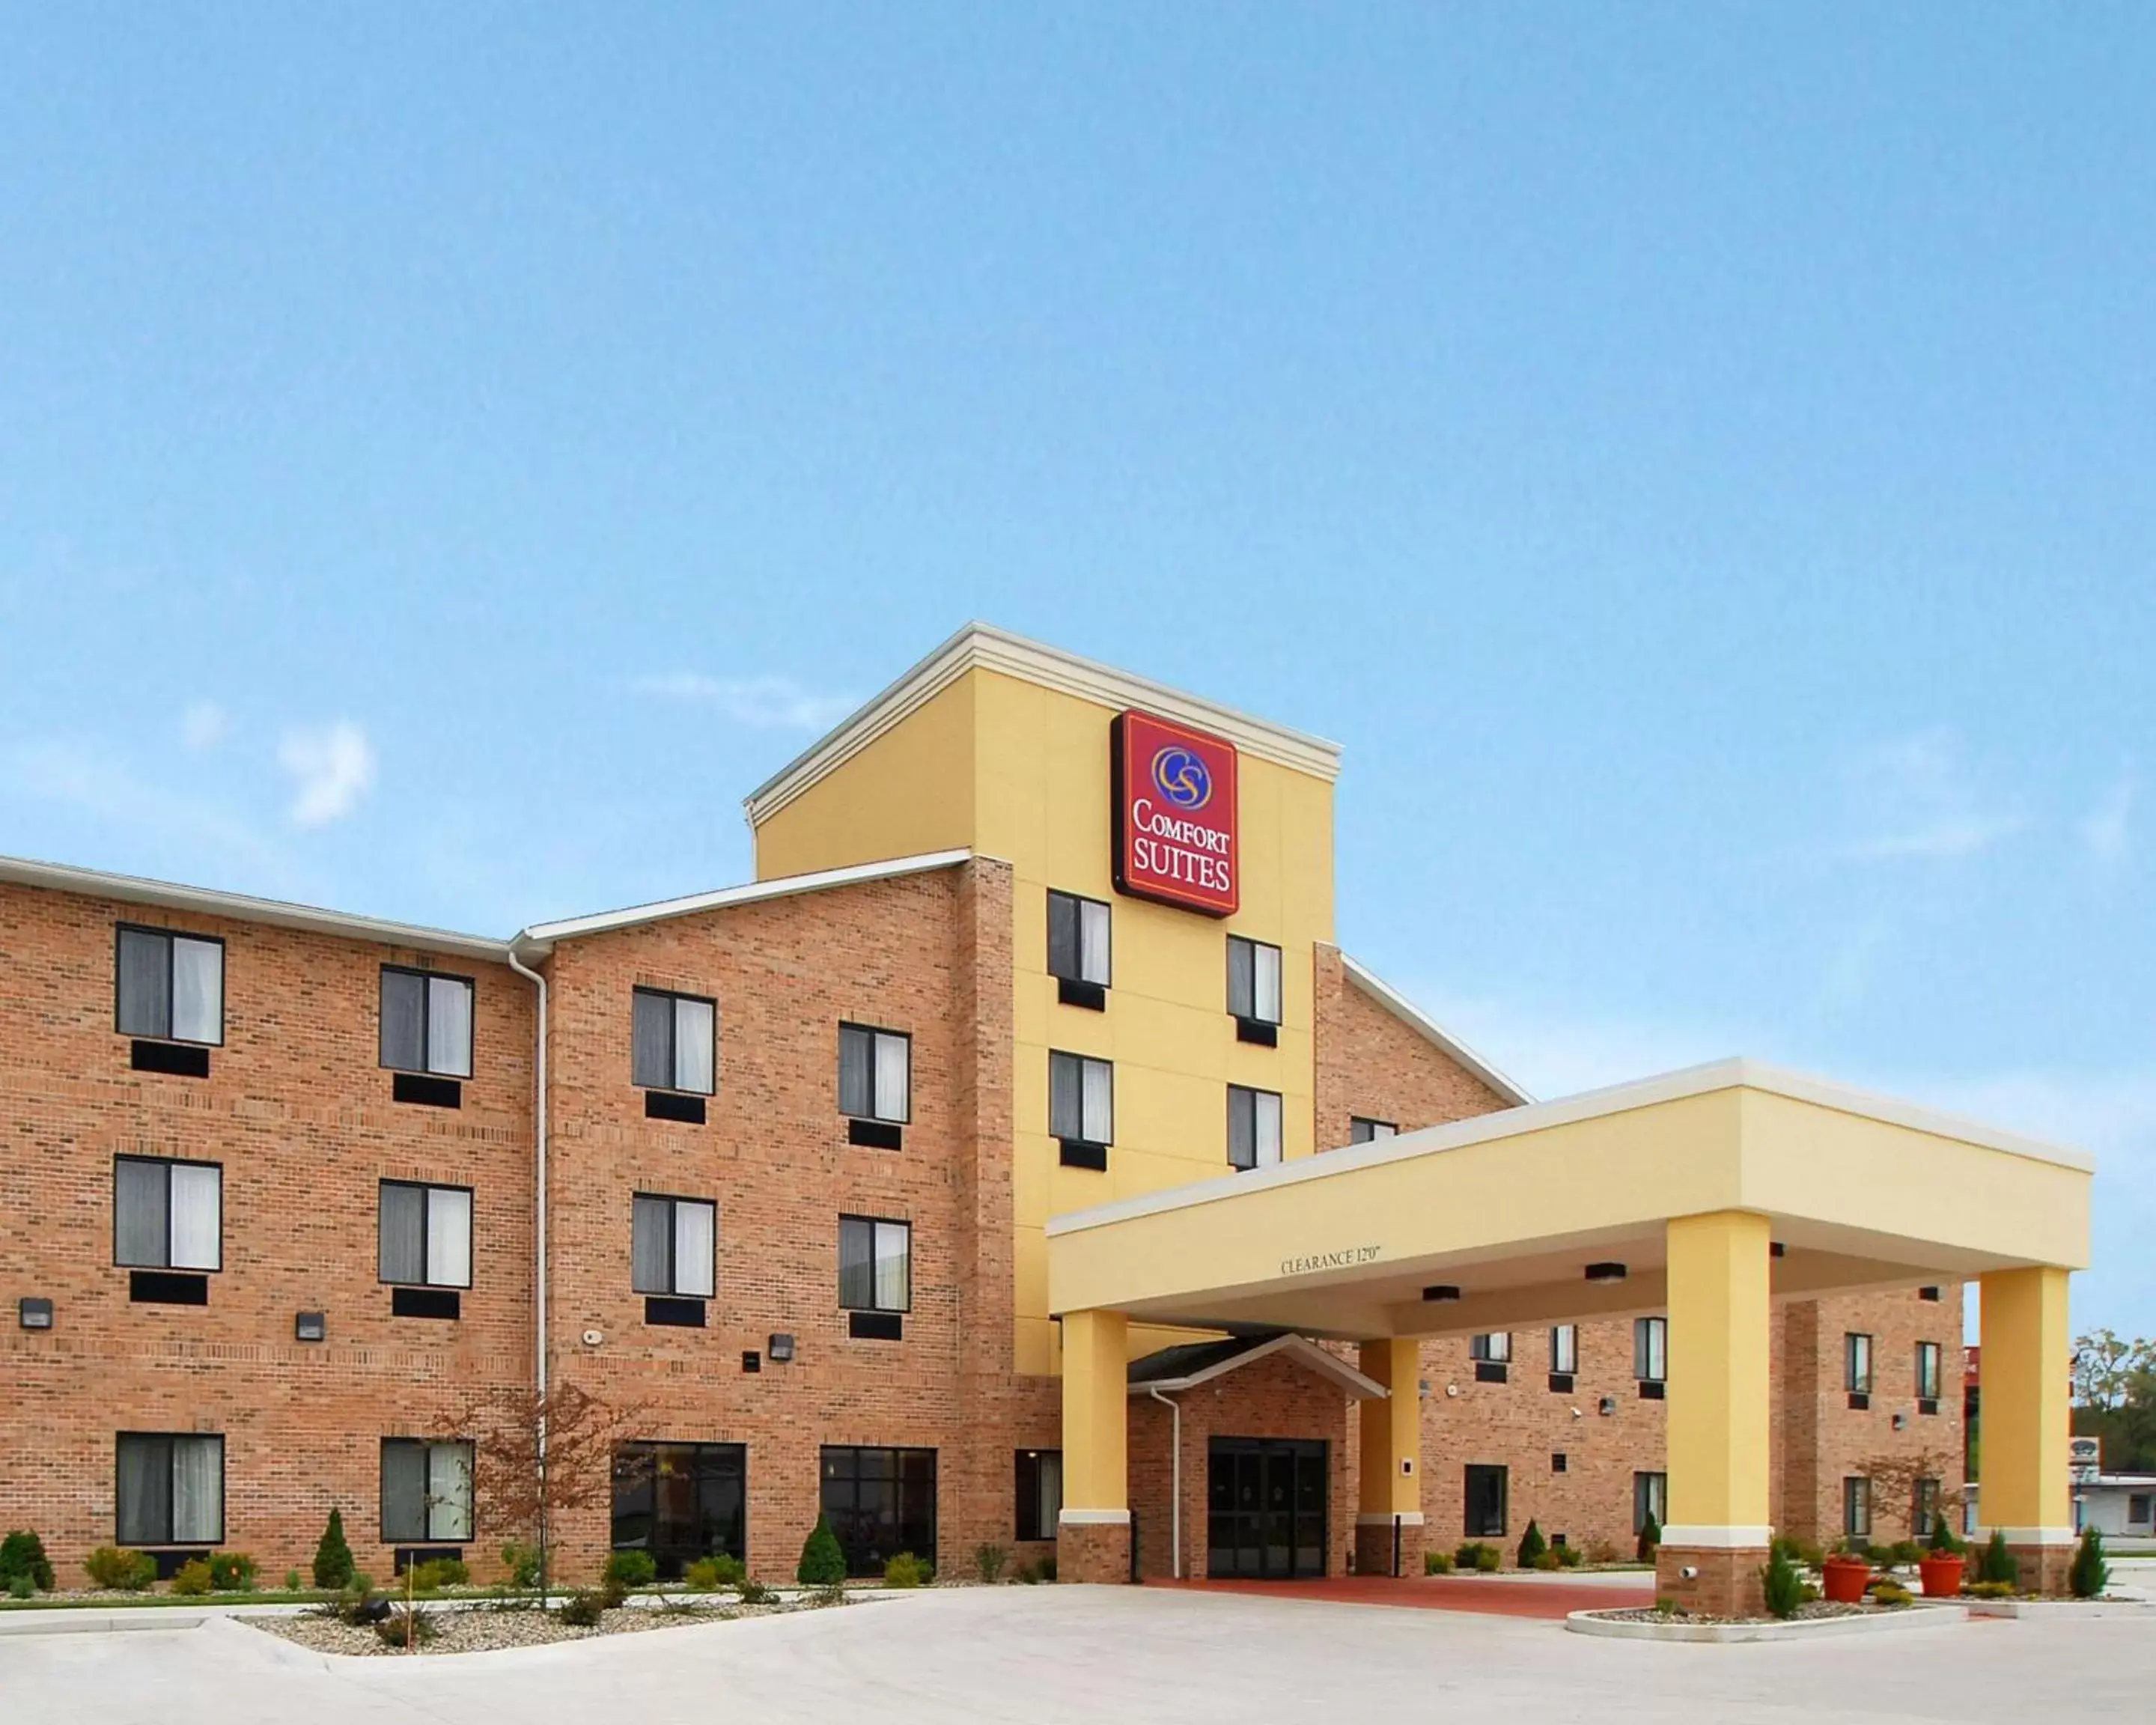 Property Building in Comfort Suites South Bend Near Casino